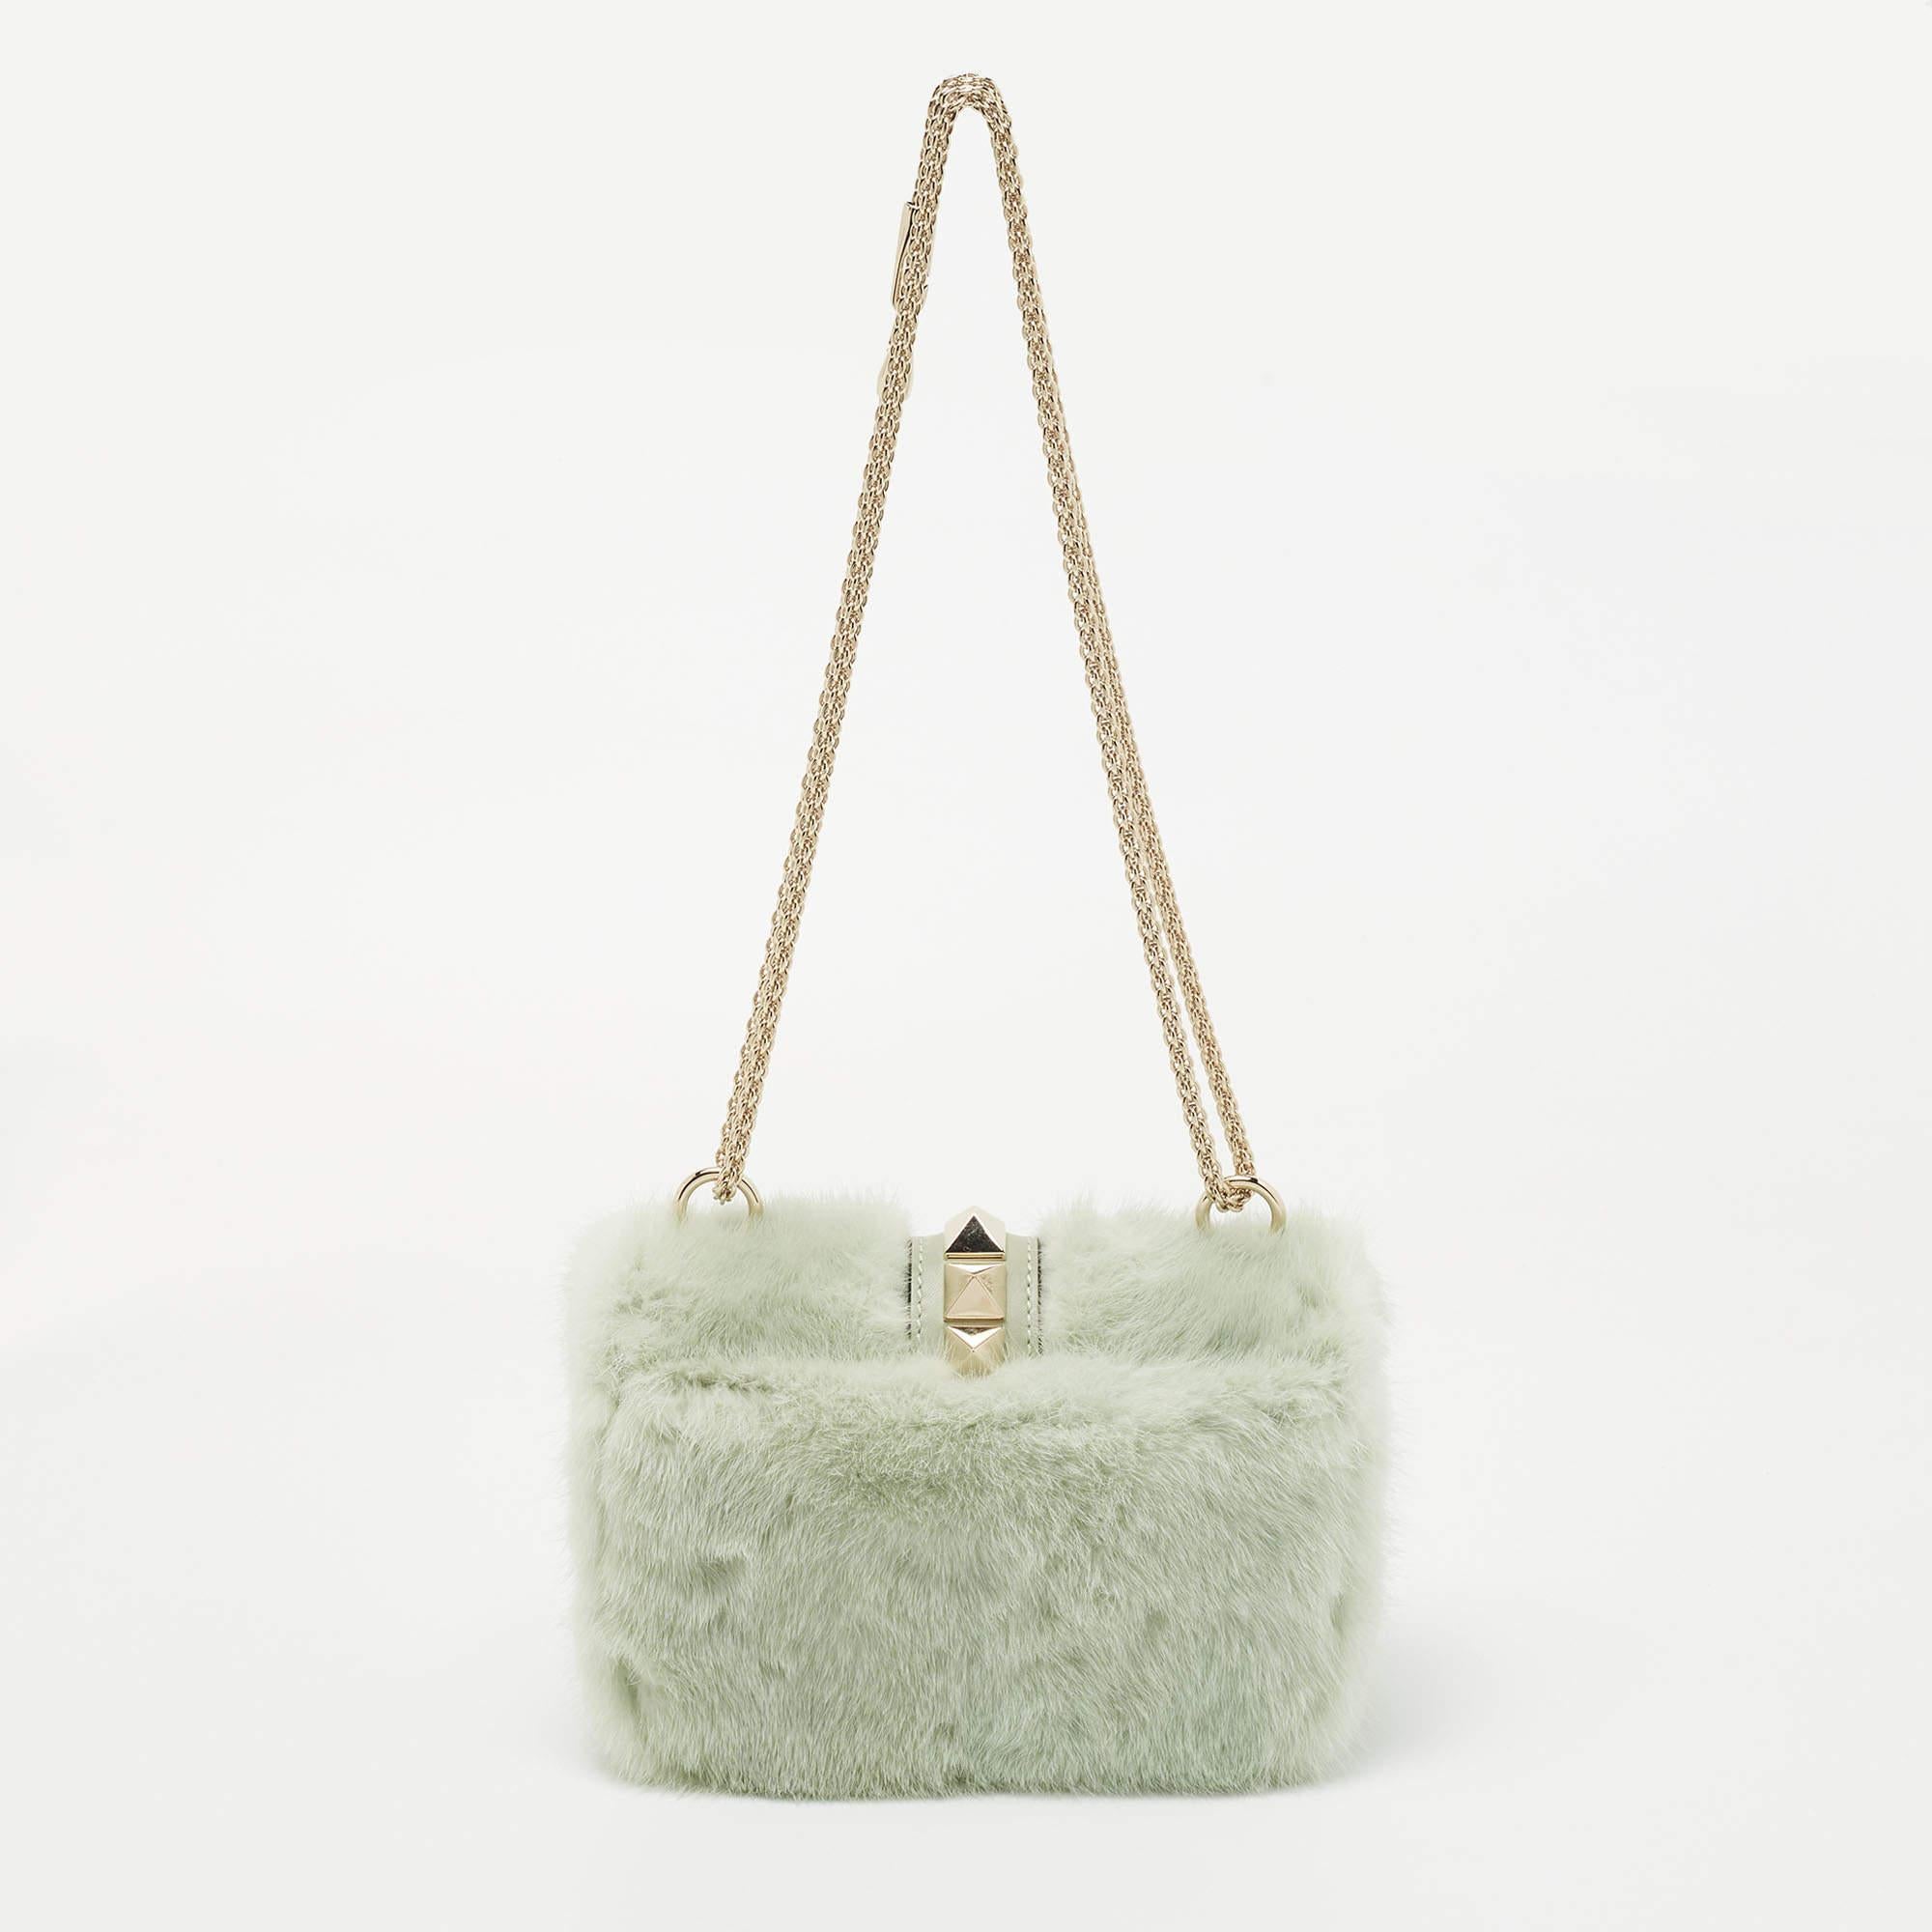 Celebrating the rich heritage of the brand, this Valentino bag is decorated with Rockstuds. It is made from fur and it showcases a noteworthy design. Lined with leather, it is secured by a branded lock closure on the front flap. While the chain